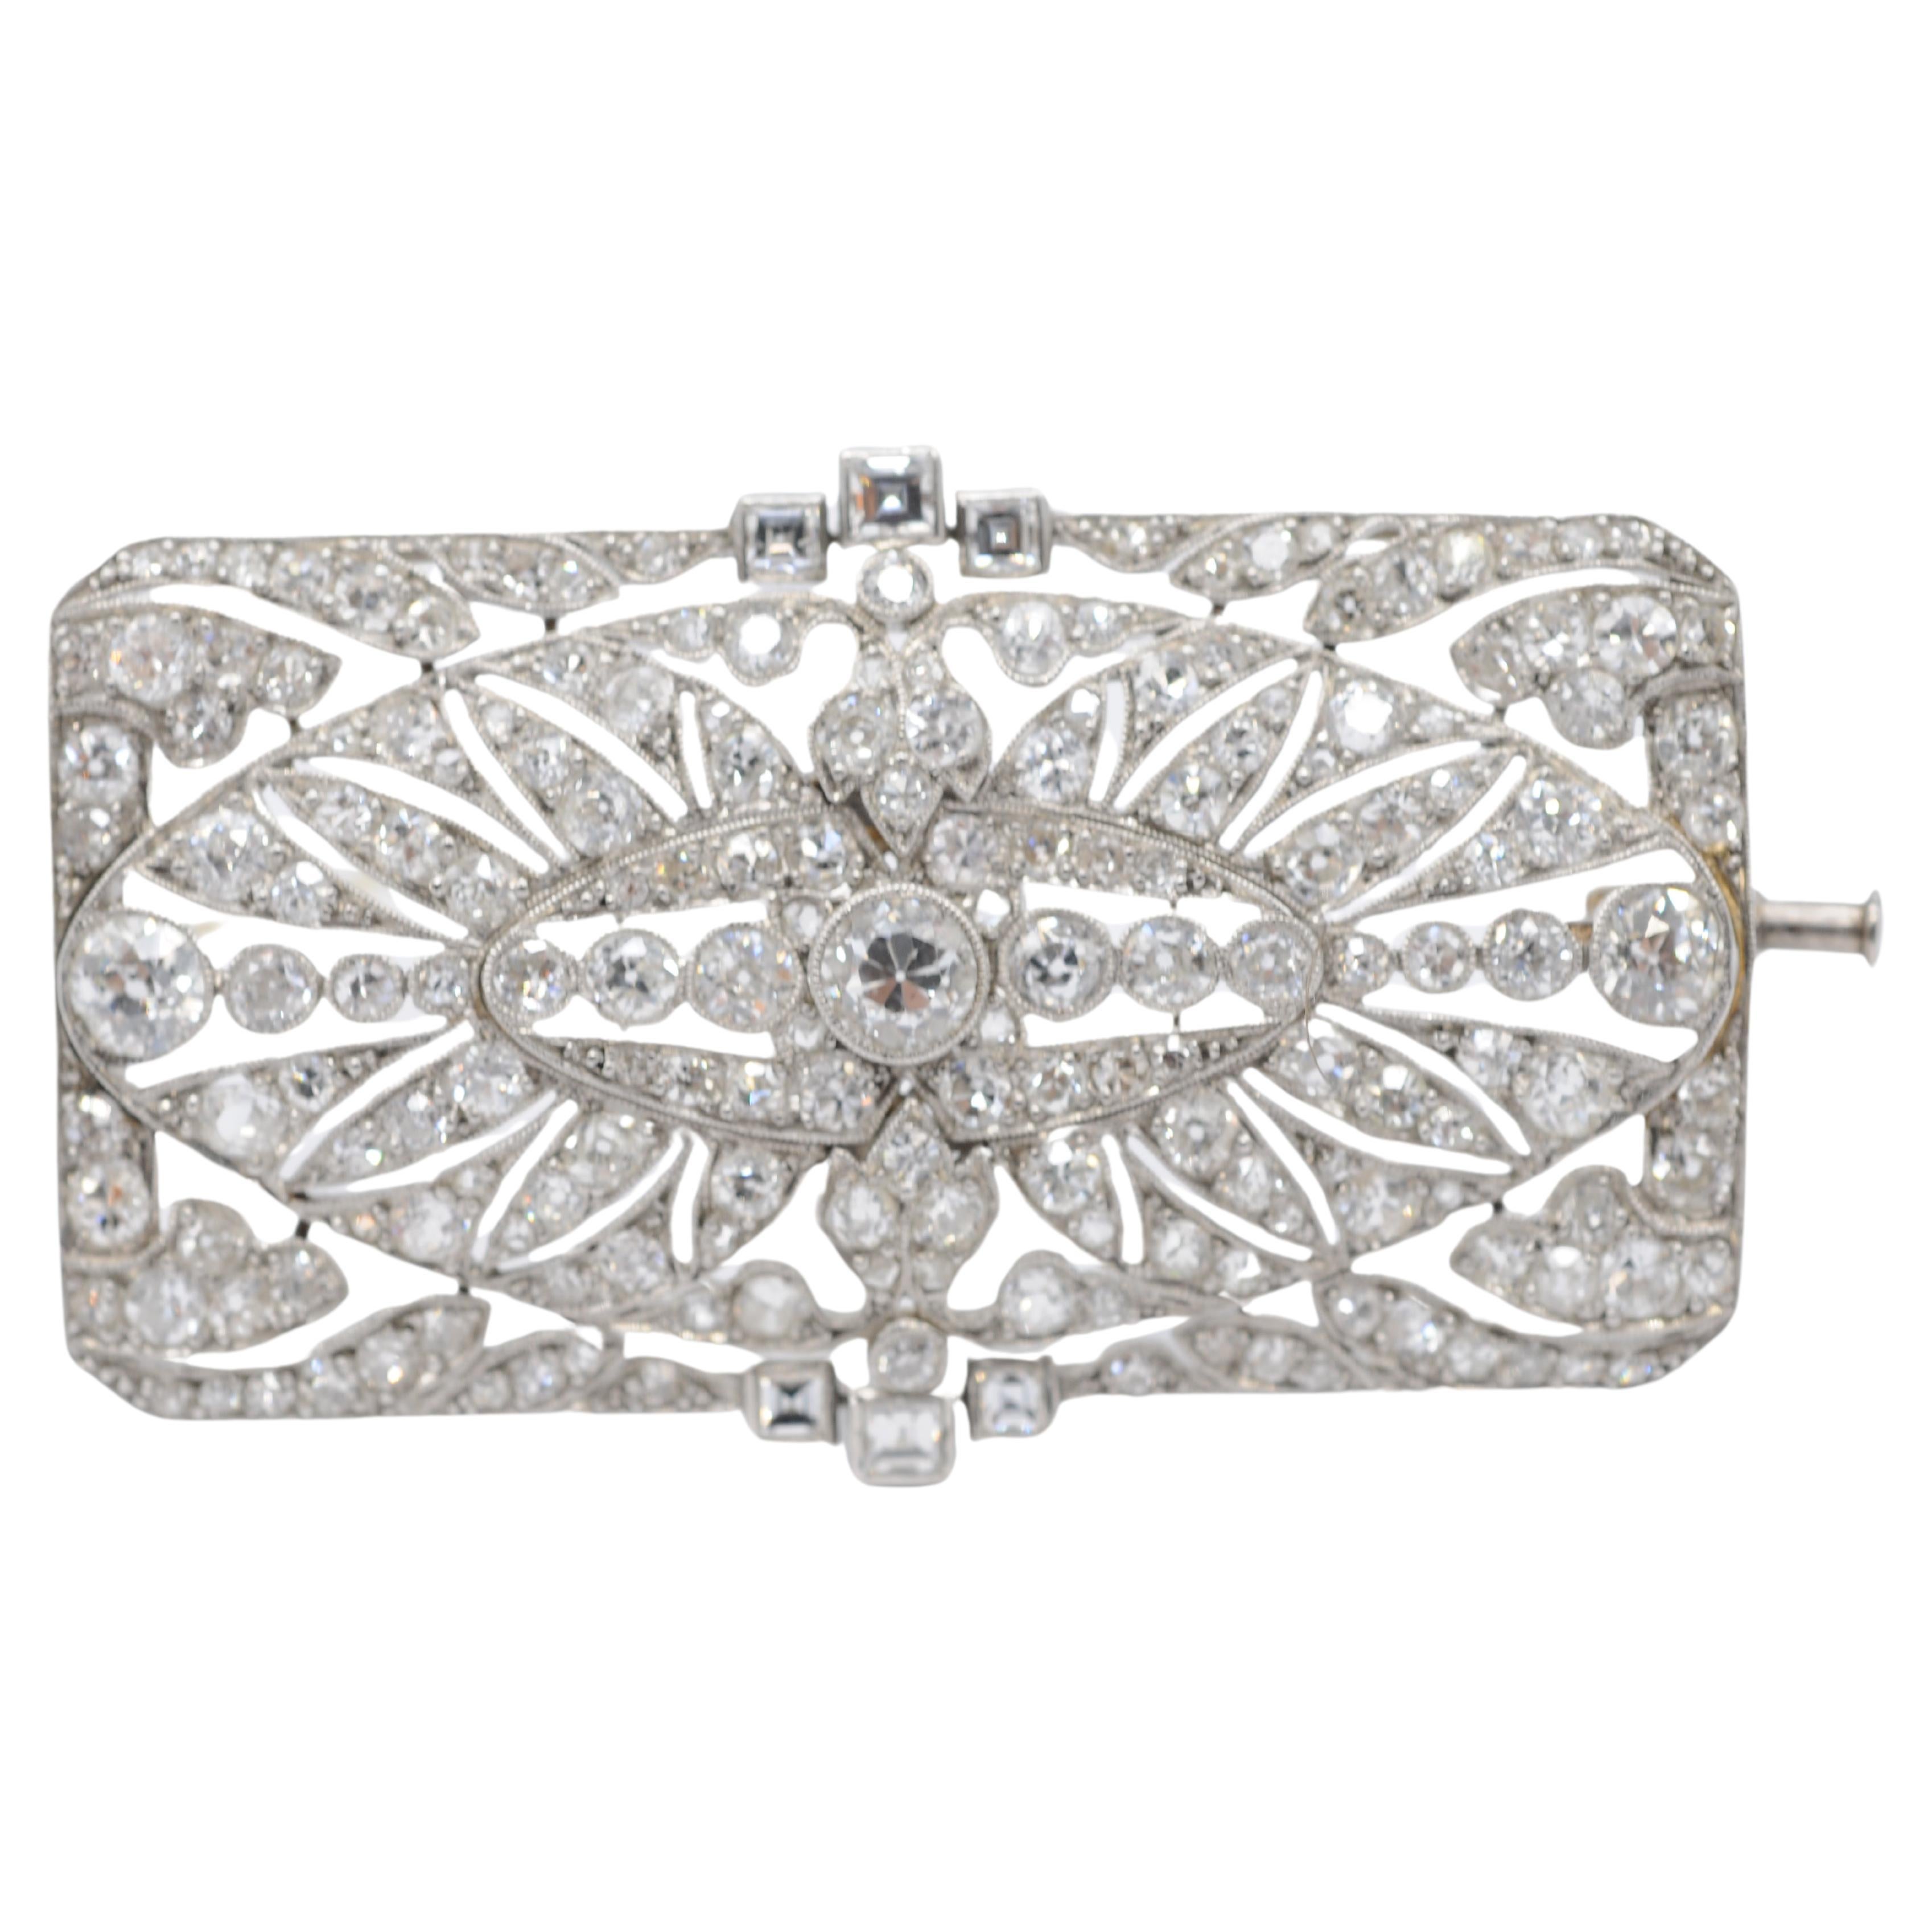 Introducing a stunning Art Deco brooch crafted from platinum. This exquisite piece exudes intricate elegance, capturing the essence of the Art Deco era with its delicate design and dazzling diamonds. Each diamond, expertly cut in the old European